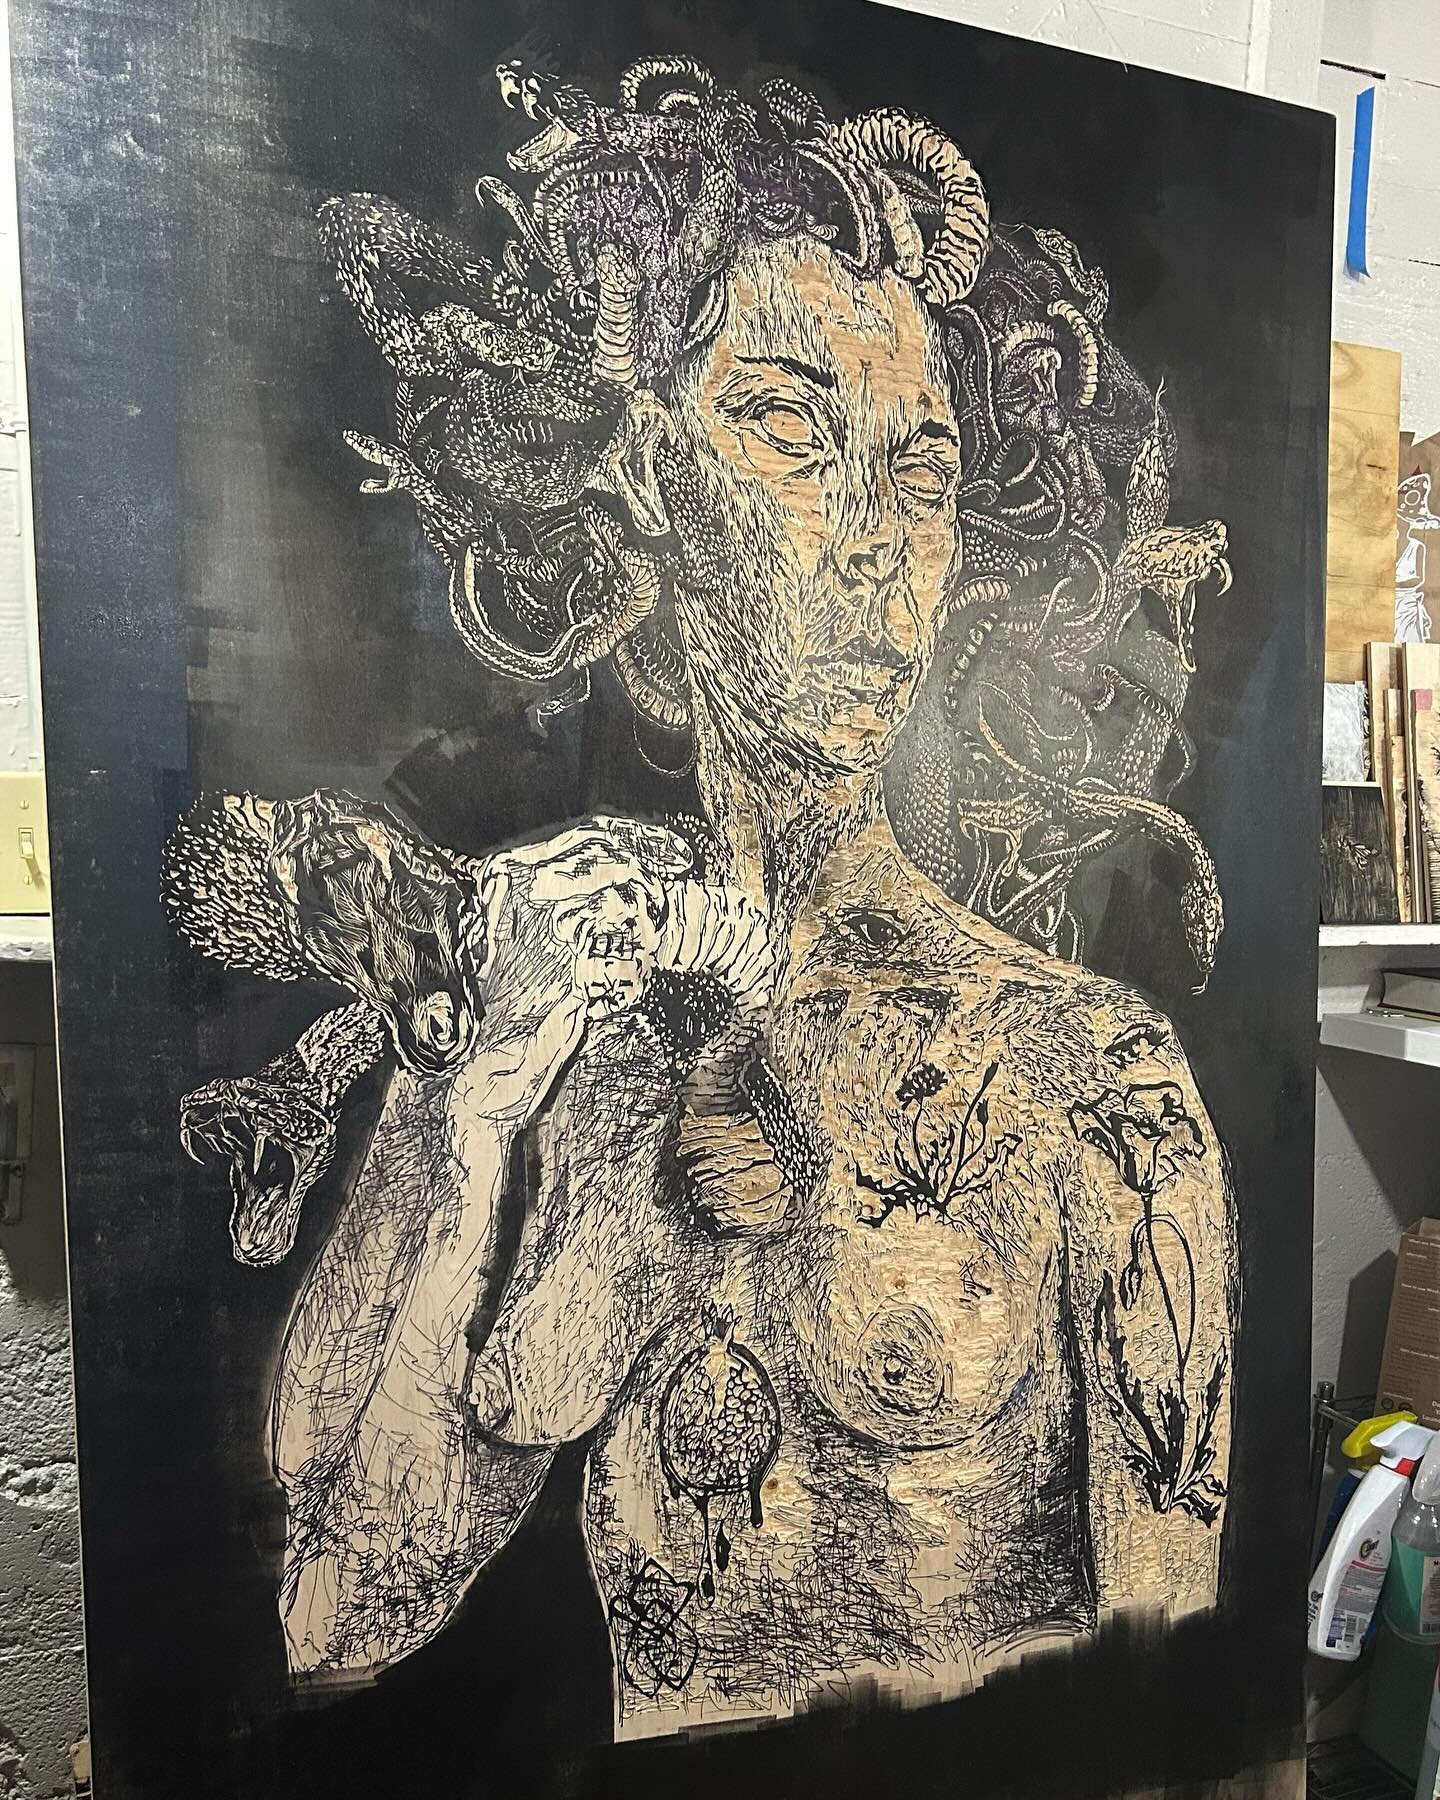 I&rsquo;ve been working on this piece for years now, beginning with a drawing in 2019. She&rsquo;s not complete yet, but I am getting sooo close. It&rsquo;s a 6ftx4ft tall woodcut and packed full of symbols. Much like my Shahrazad piece, it&rsquo;s a